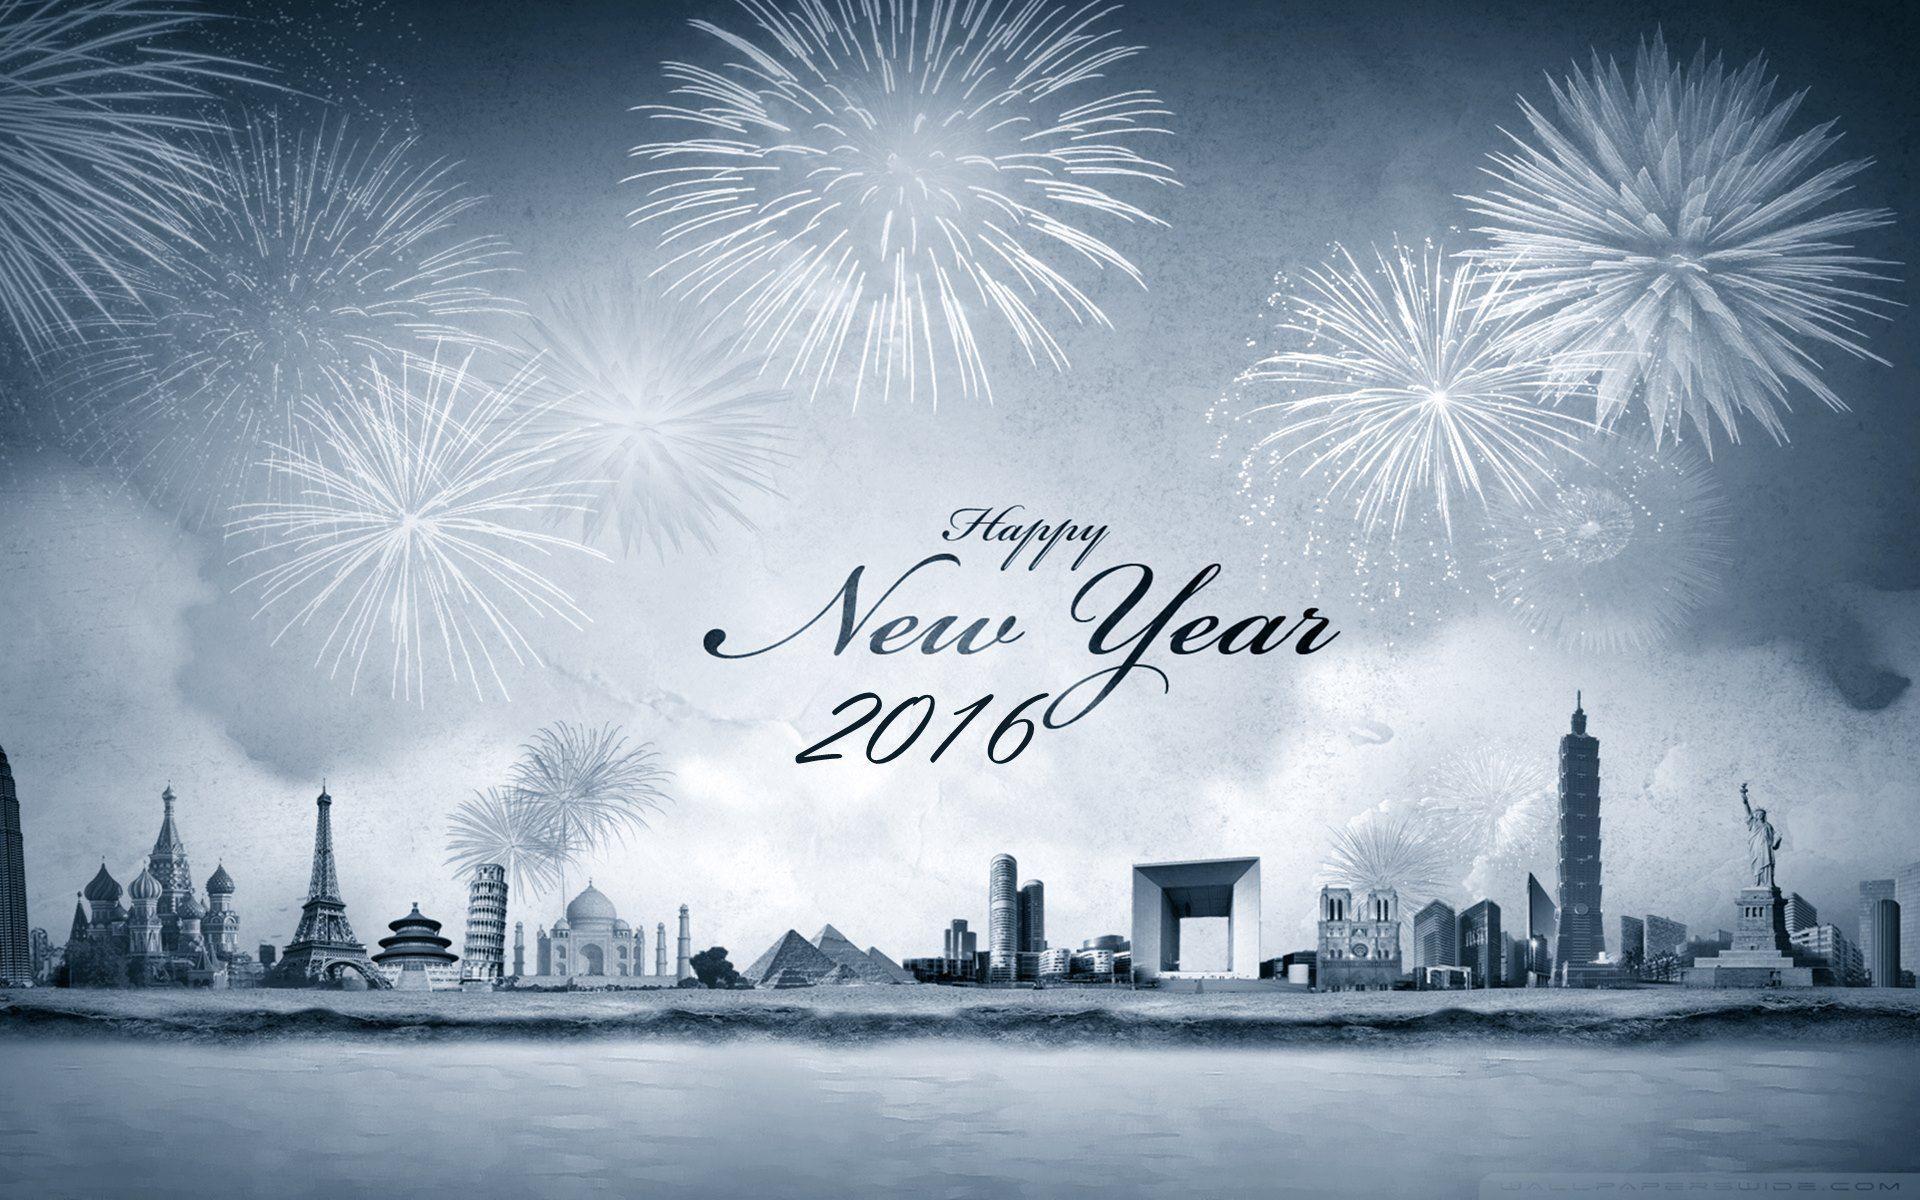 Happy New Year 2016 Free Download Hindi Messages And Image